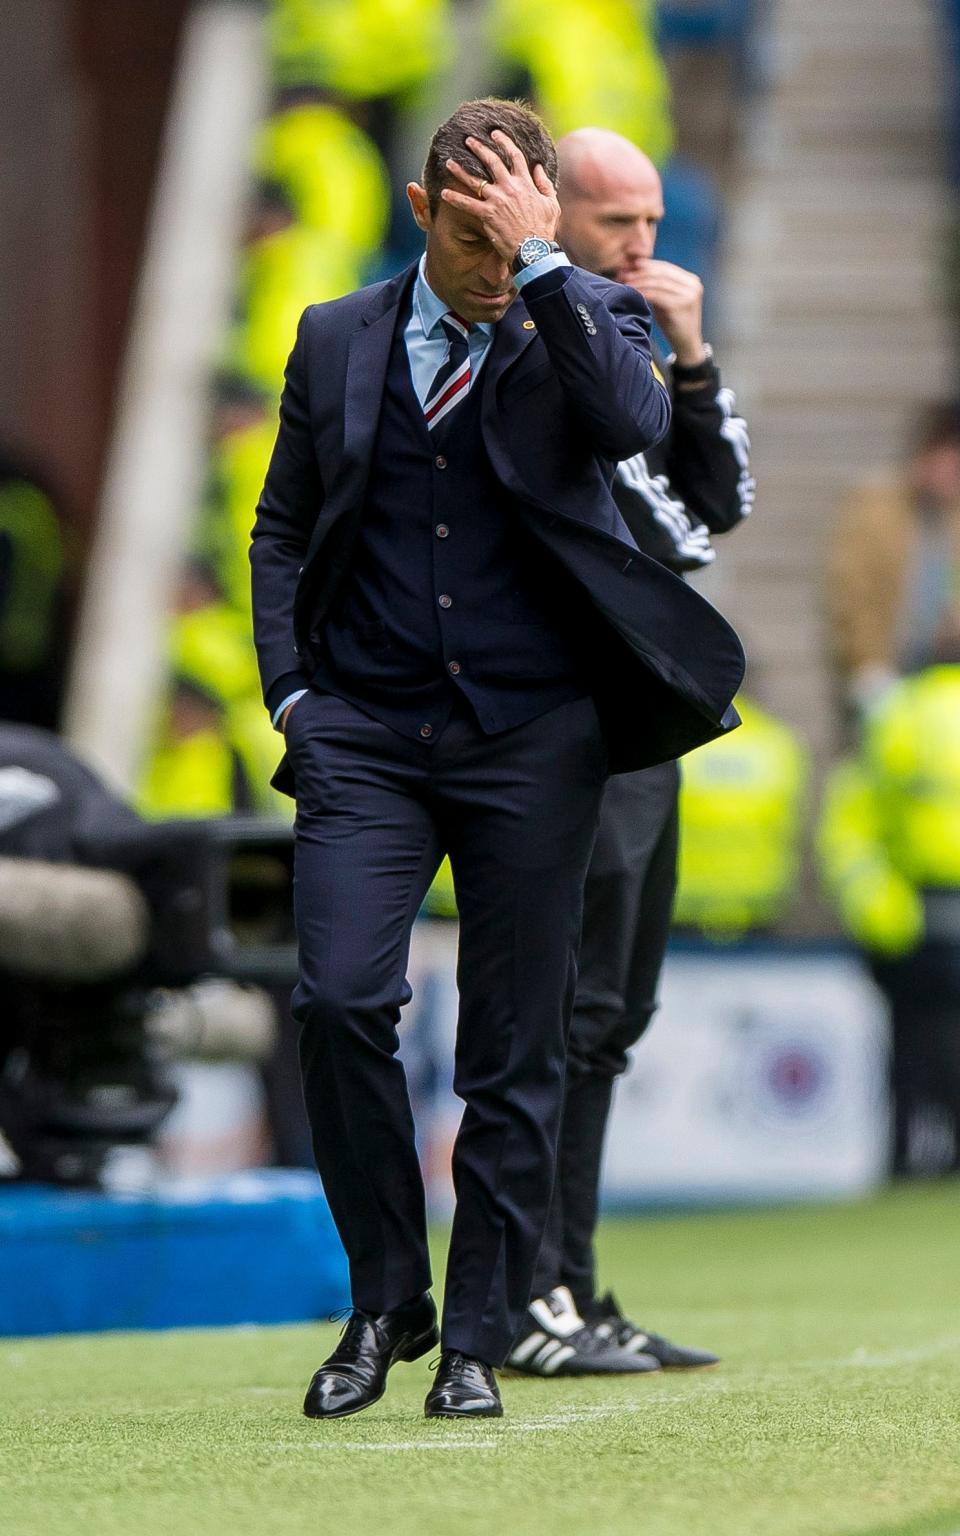 Rangers' manager Pedro Caixinha during the defeat - Credit: PA